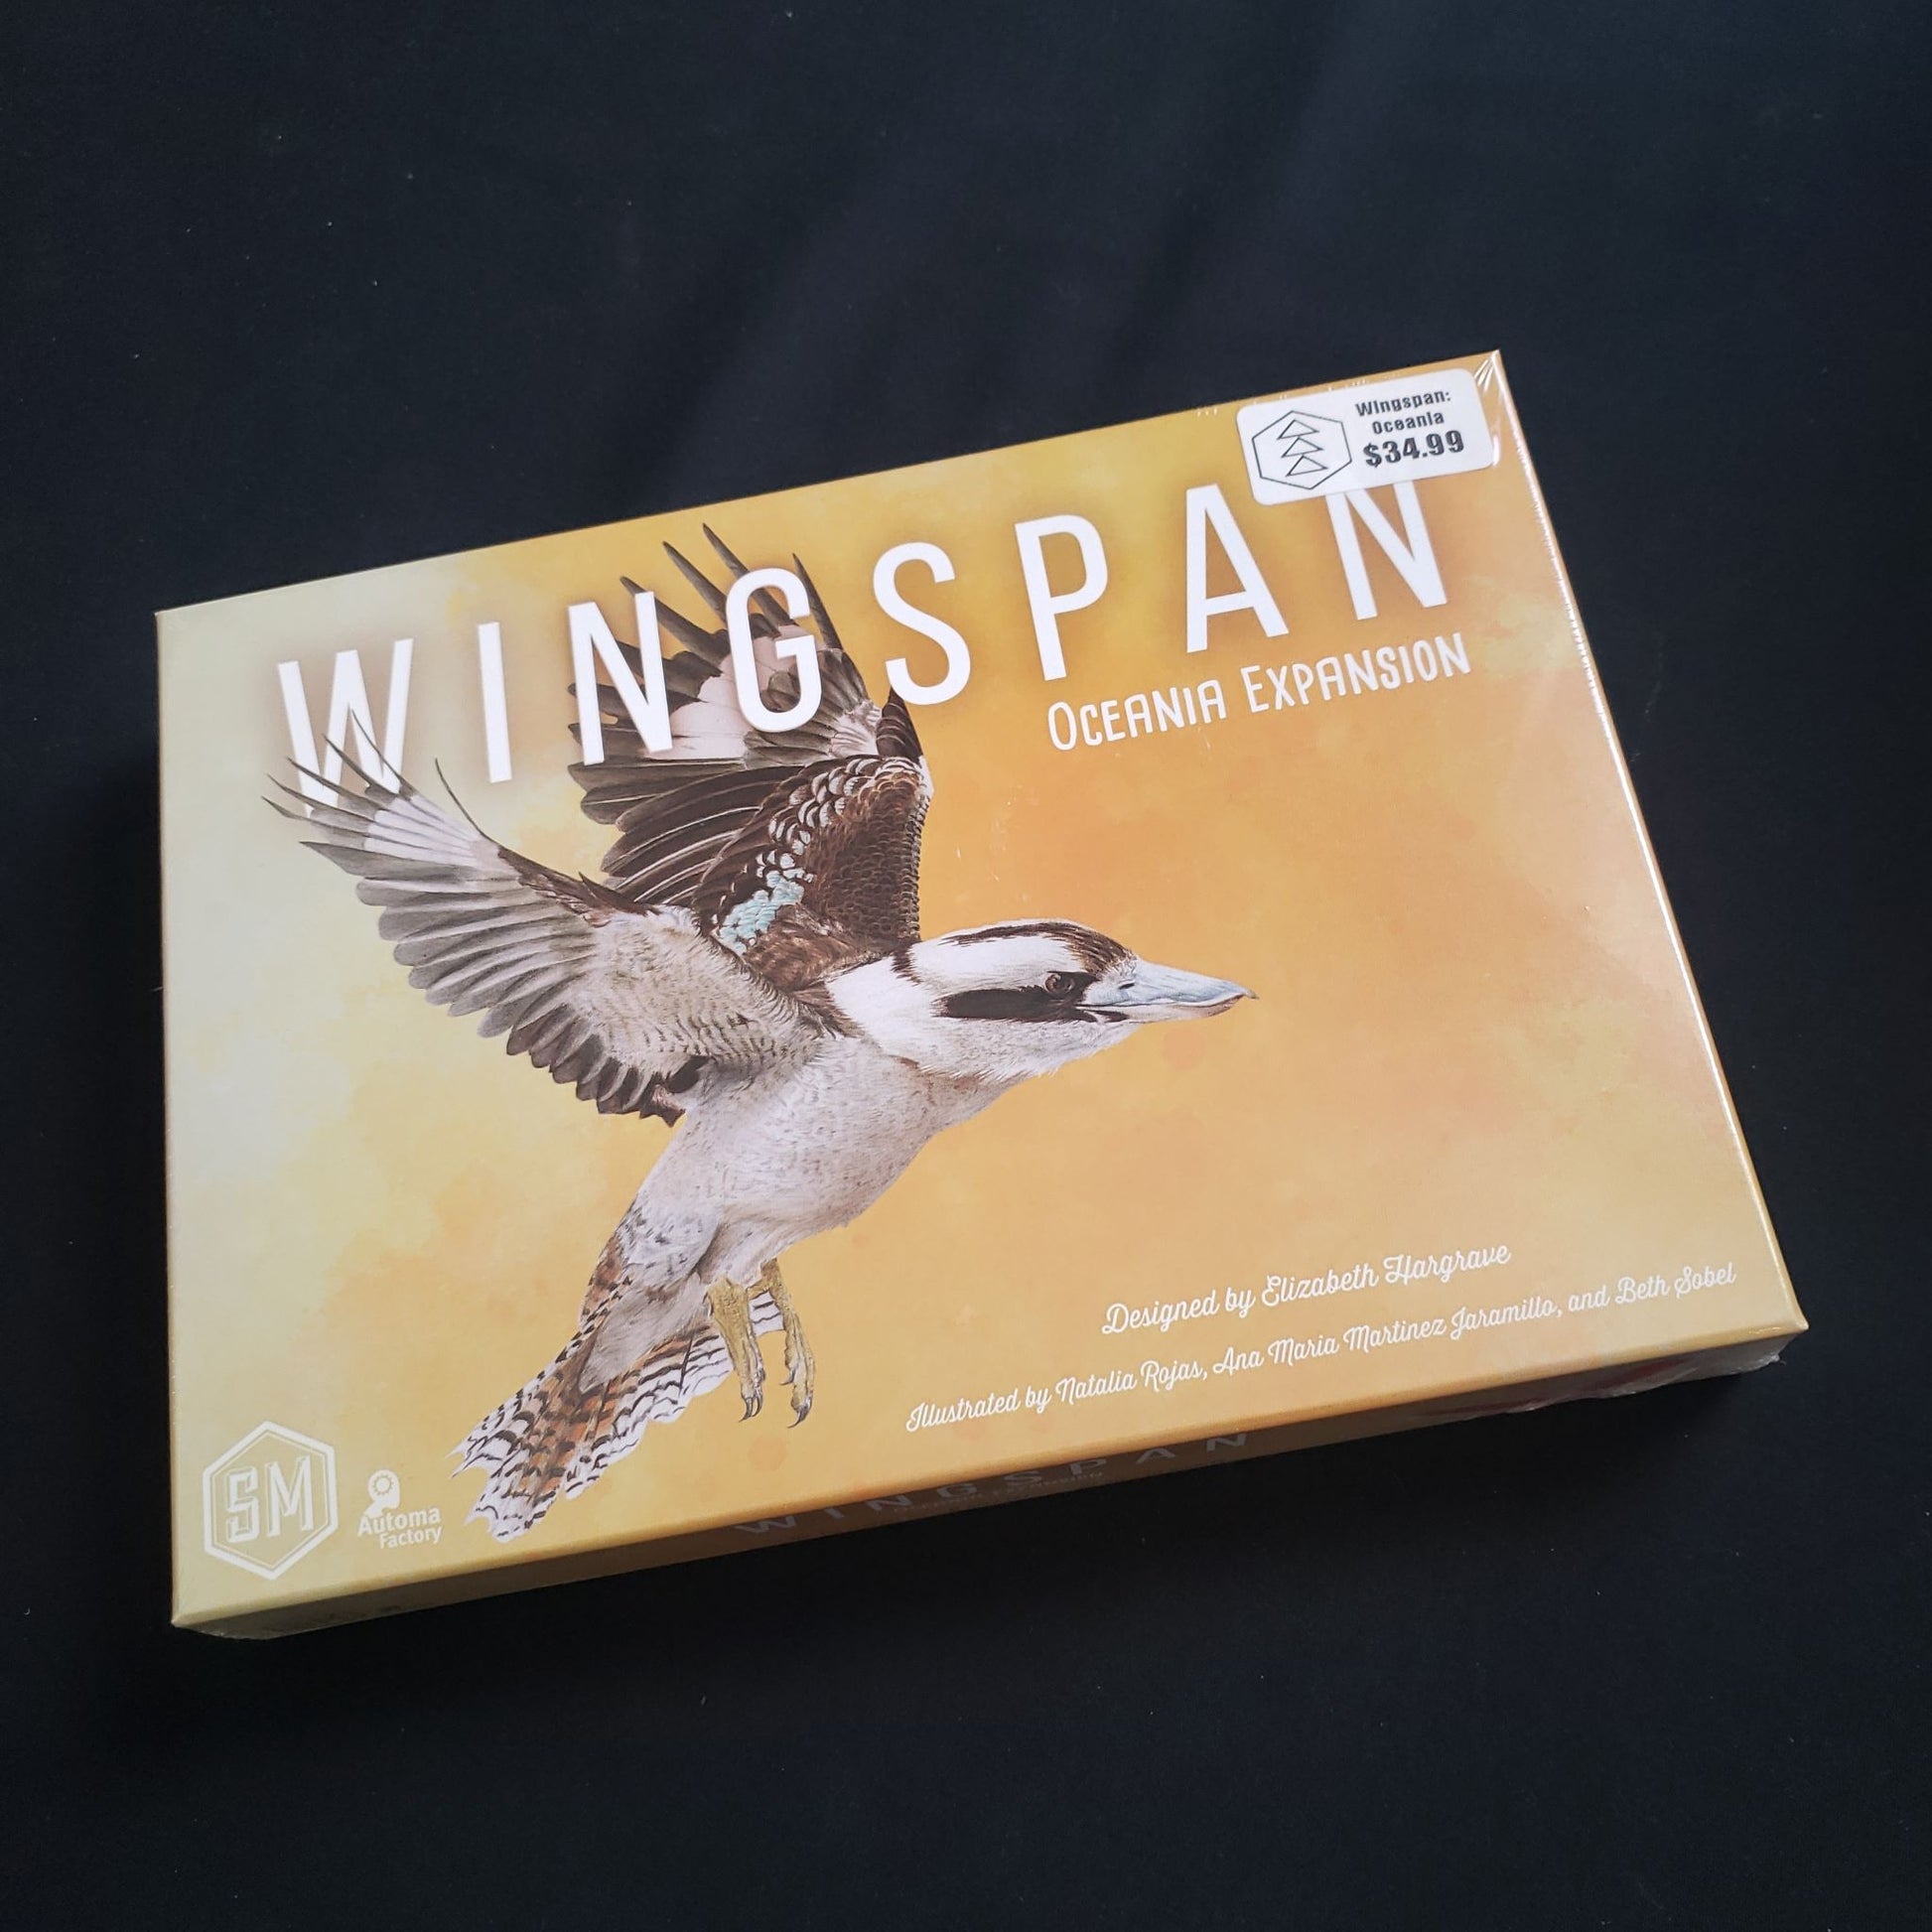 Wingspan board game: Oceania expansion - front cover of box